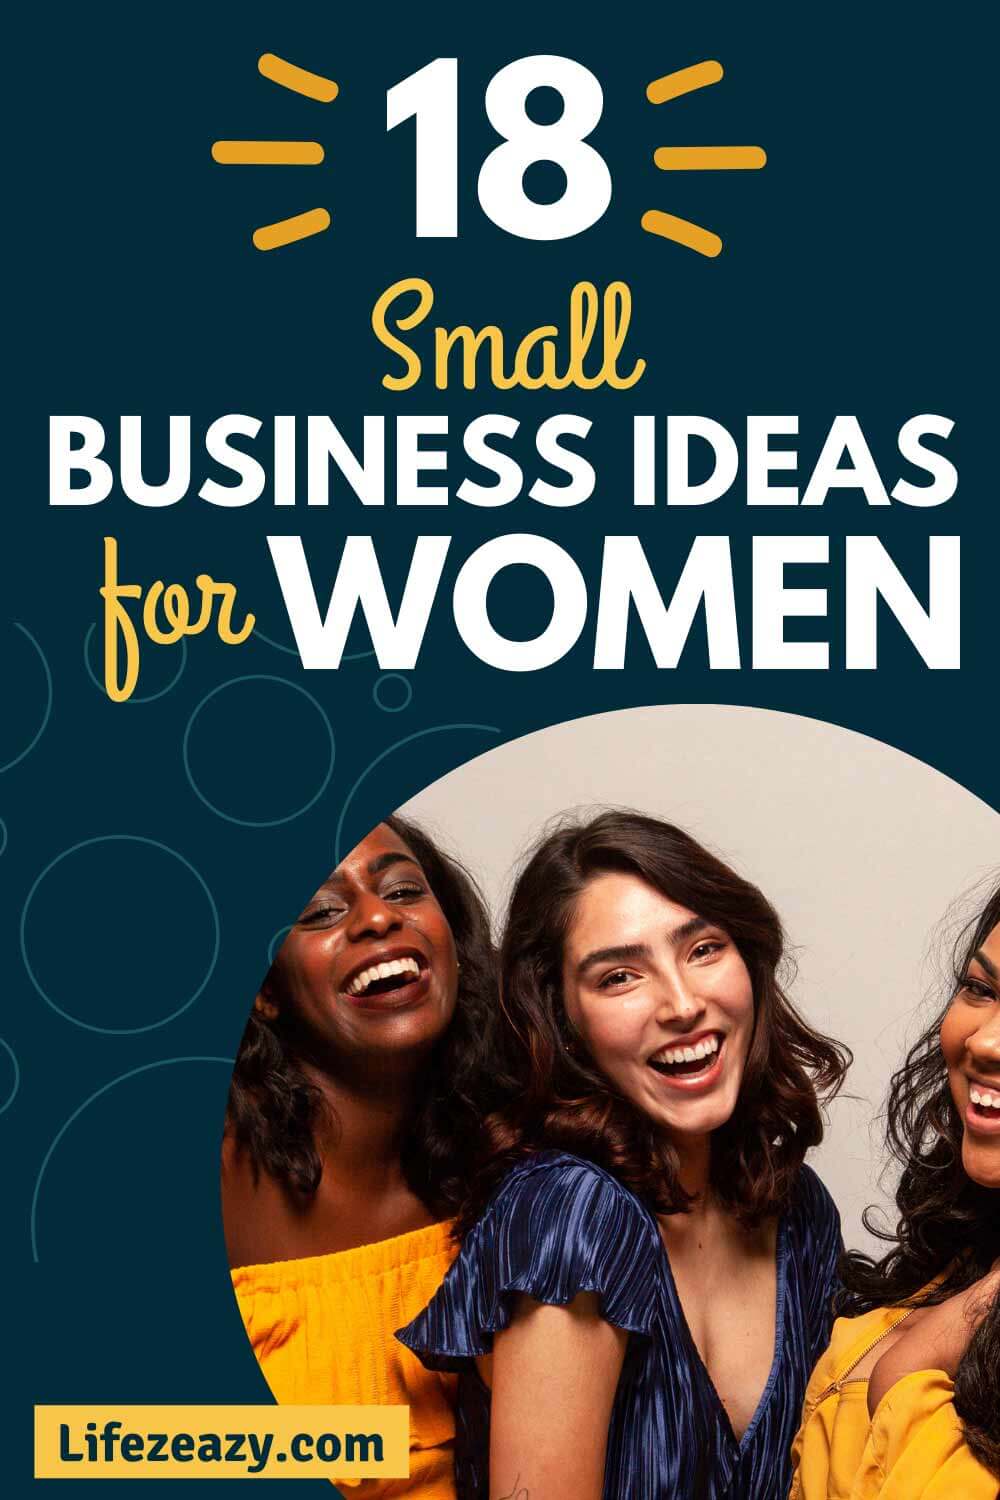 Small Business ideas for women